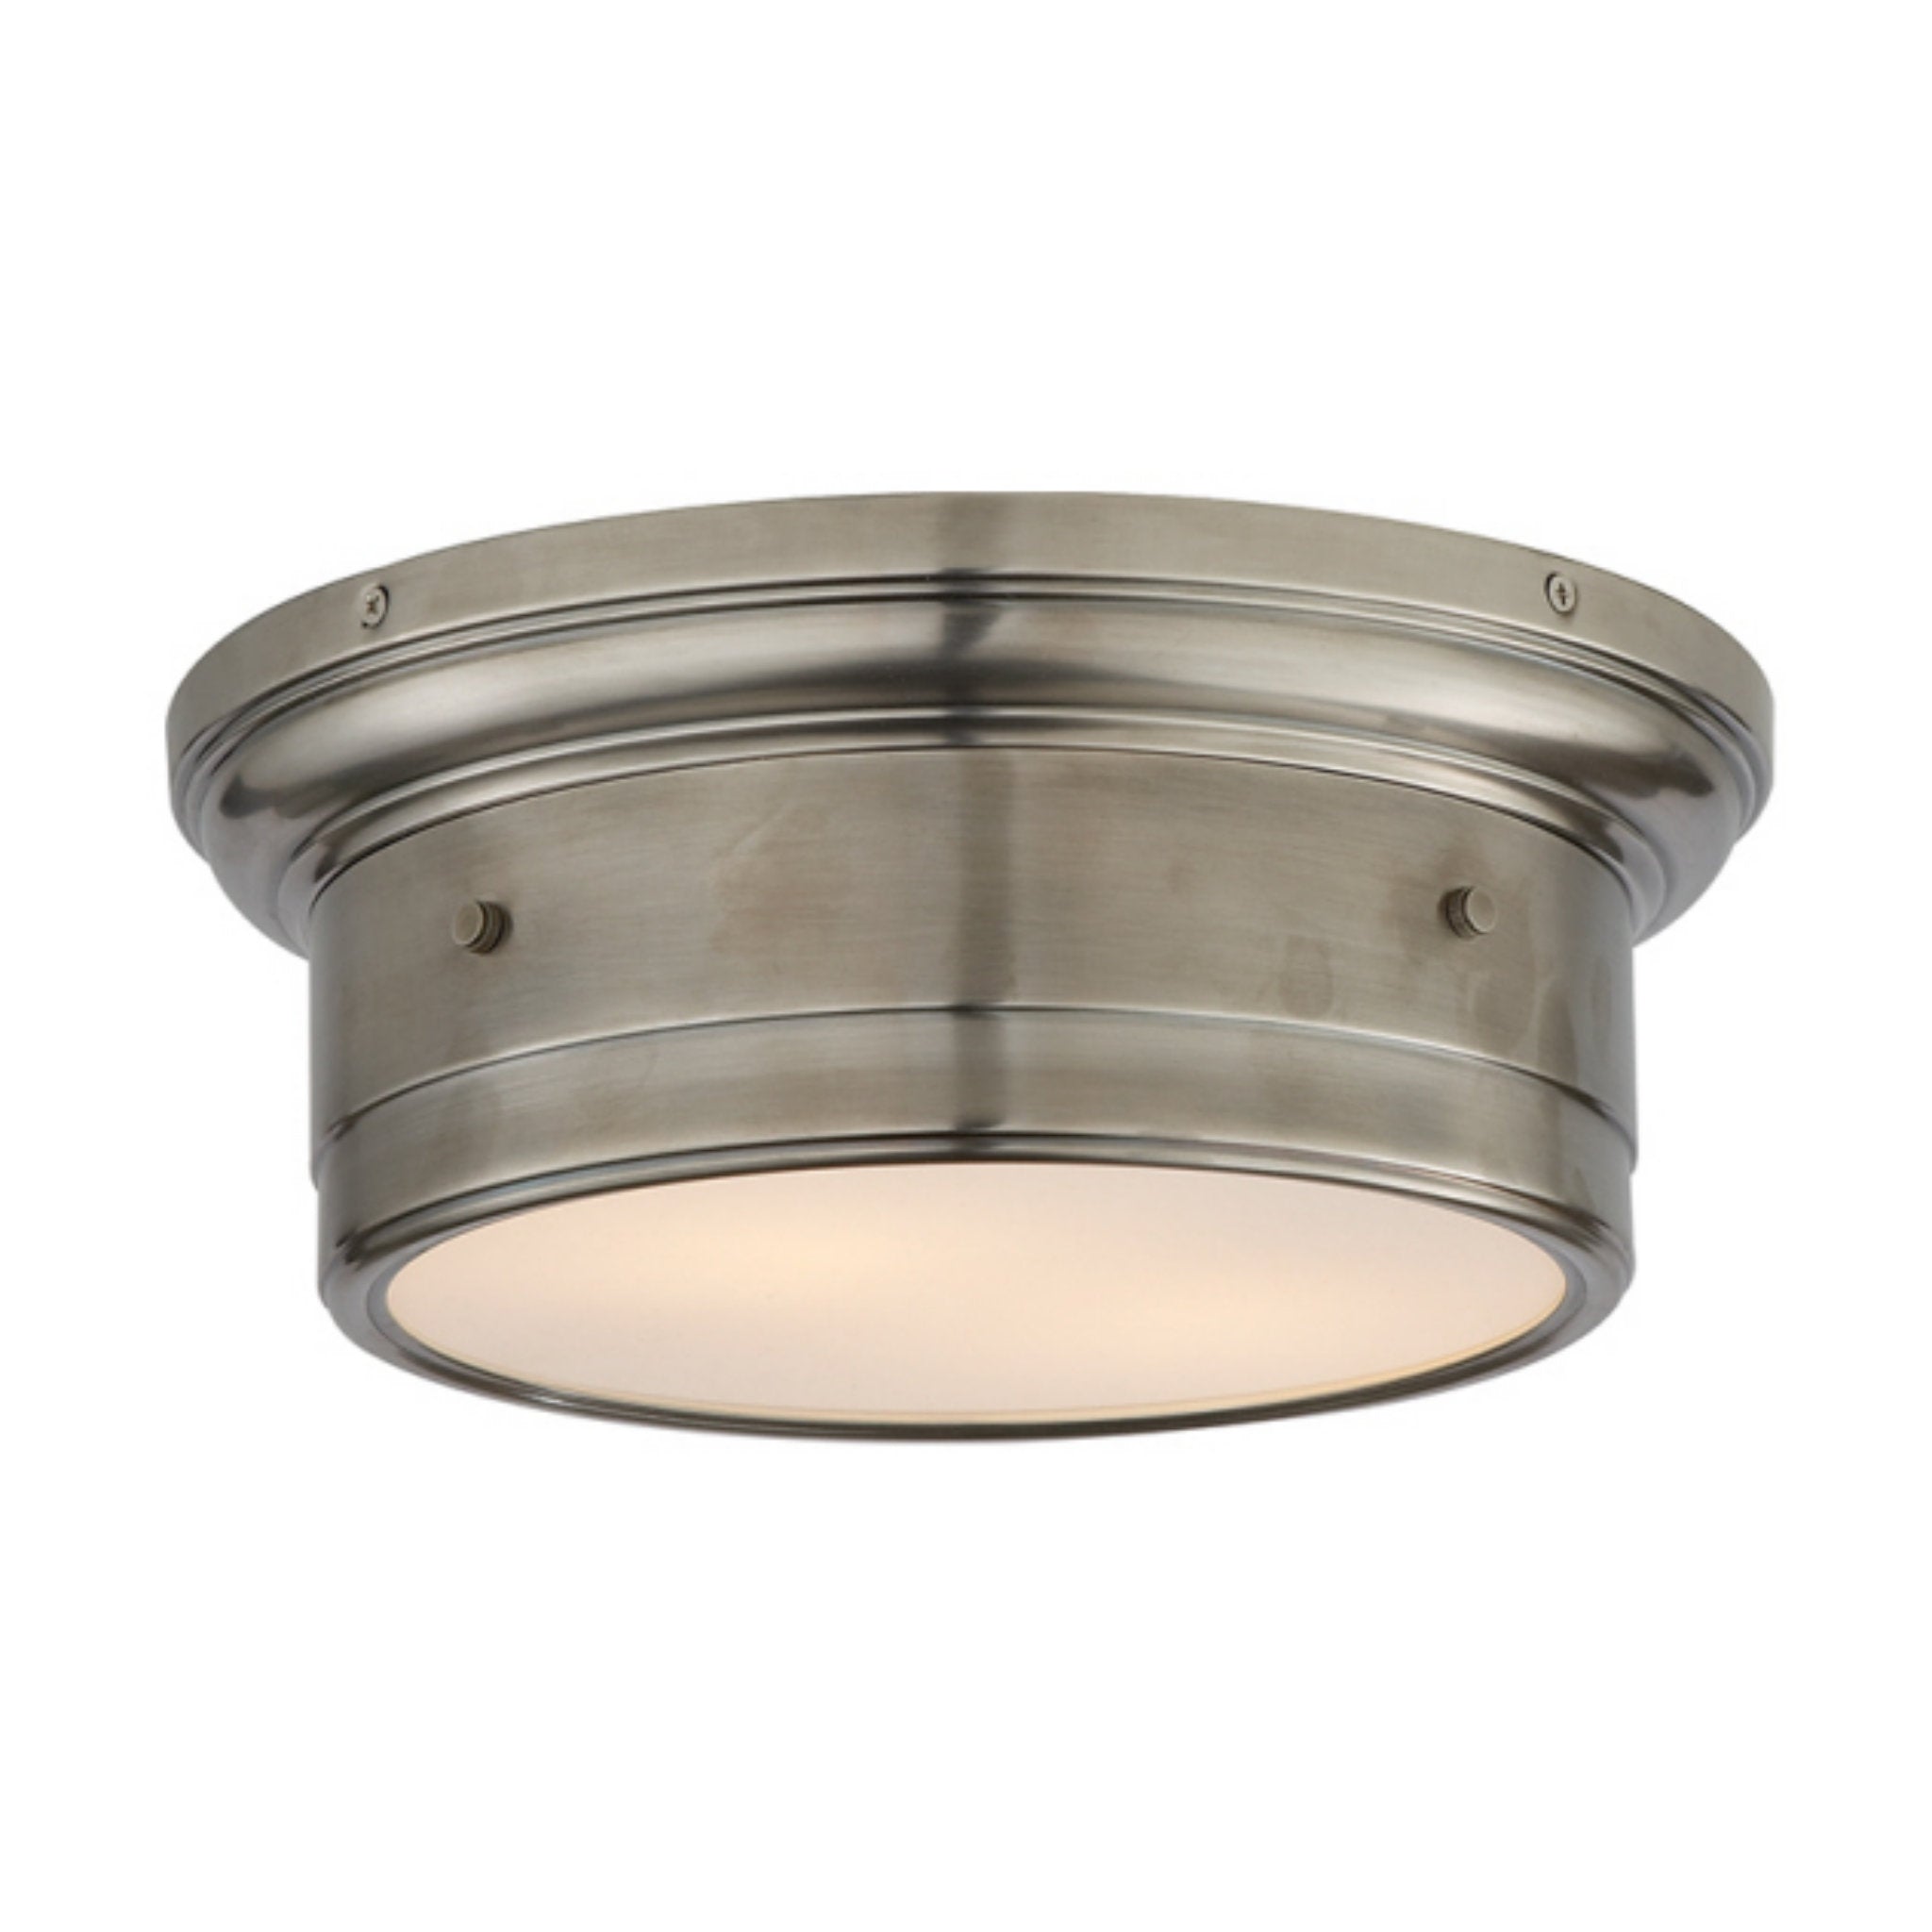 Visual Comfort Siena Small Flush Mount in Antique Nickel with White Glass